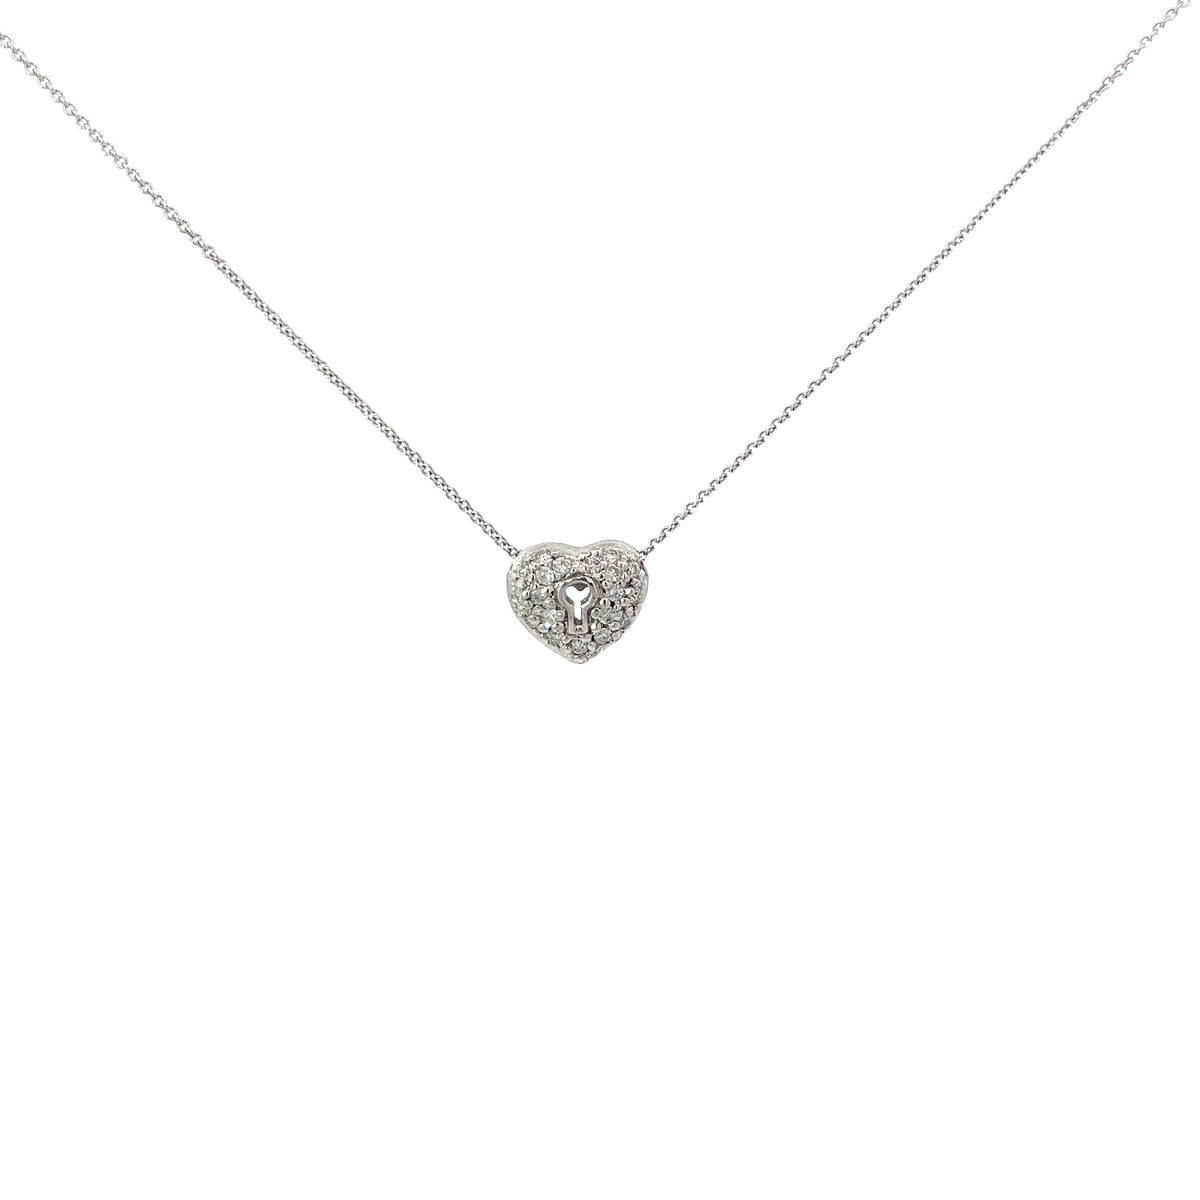 Ladies 14k white gold diamond heart with lock necklace